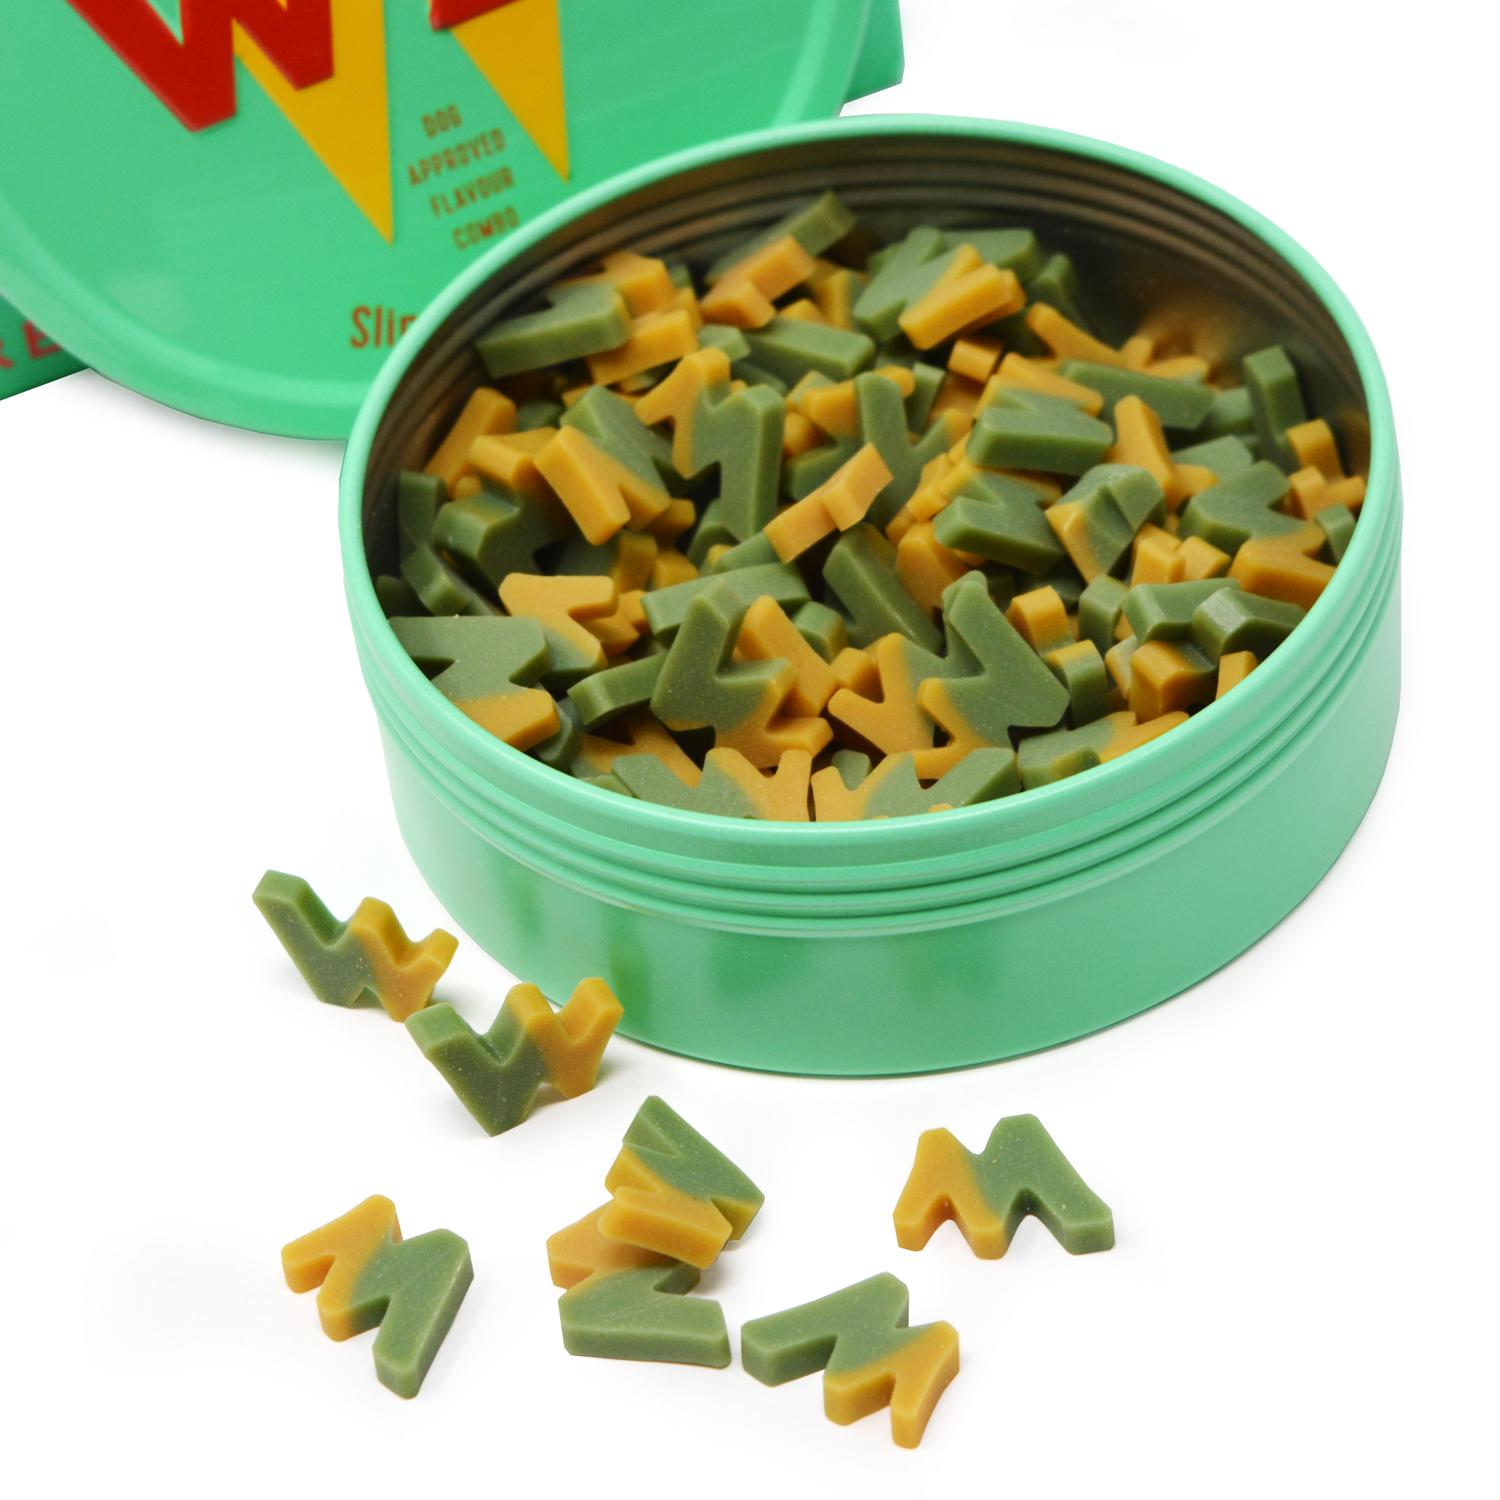 An open tin of W'ZIS slipper and biscuit plant based dog treats